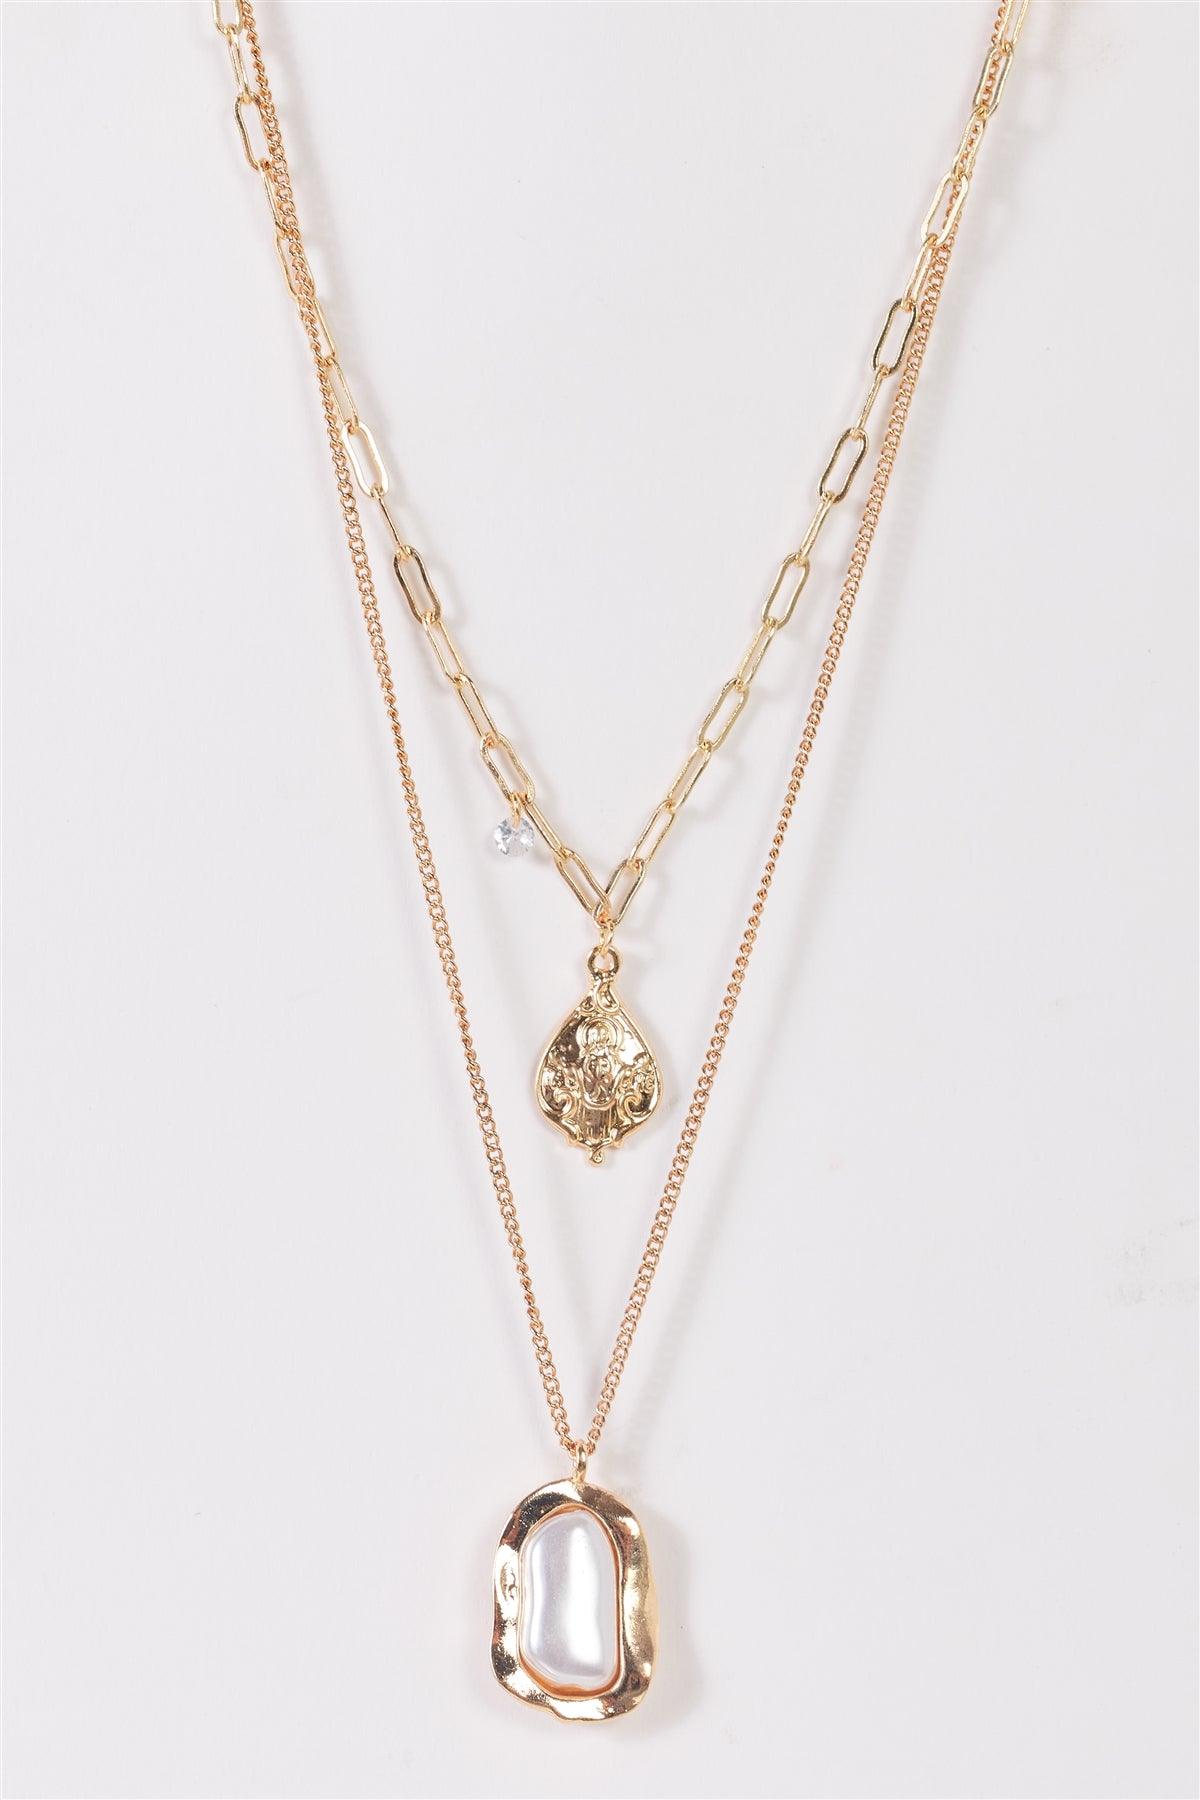 Gold Double Paper Clip & Link Chains With Shell Pearl & Icon Pendants And A Faux Diamond Necklace /3 Pieces